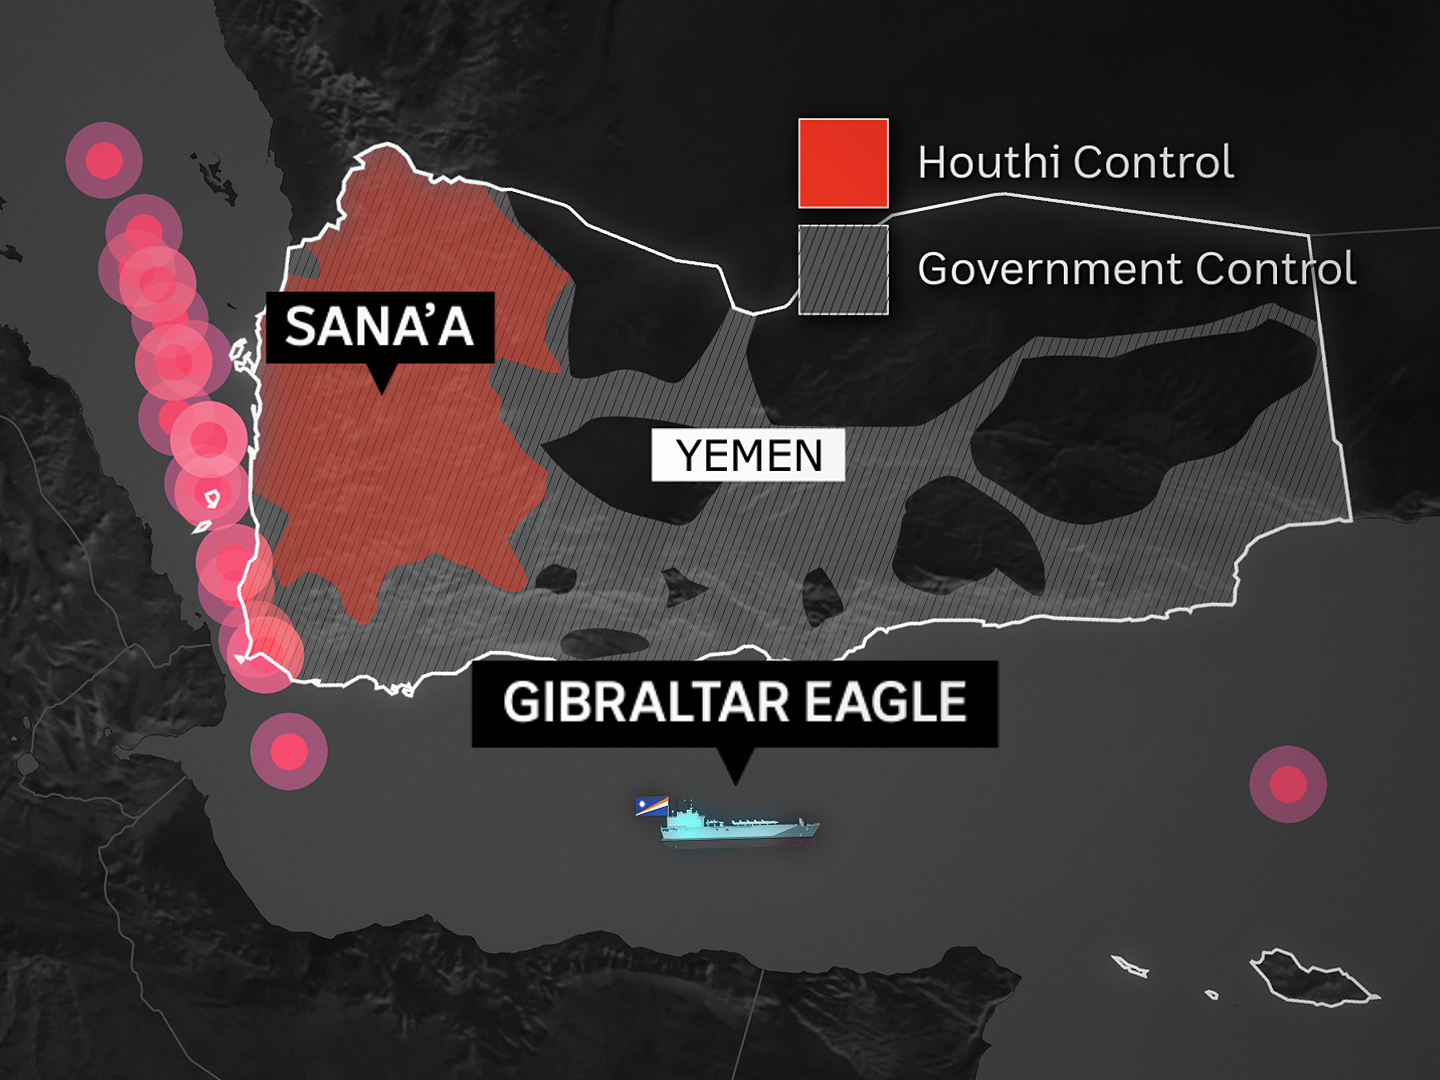 A graphic showing Yemen, the are of Houthi control and attacks on ships, and the Gibraltar Eagle.